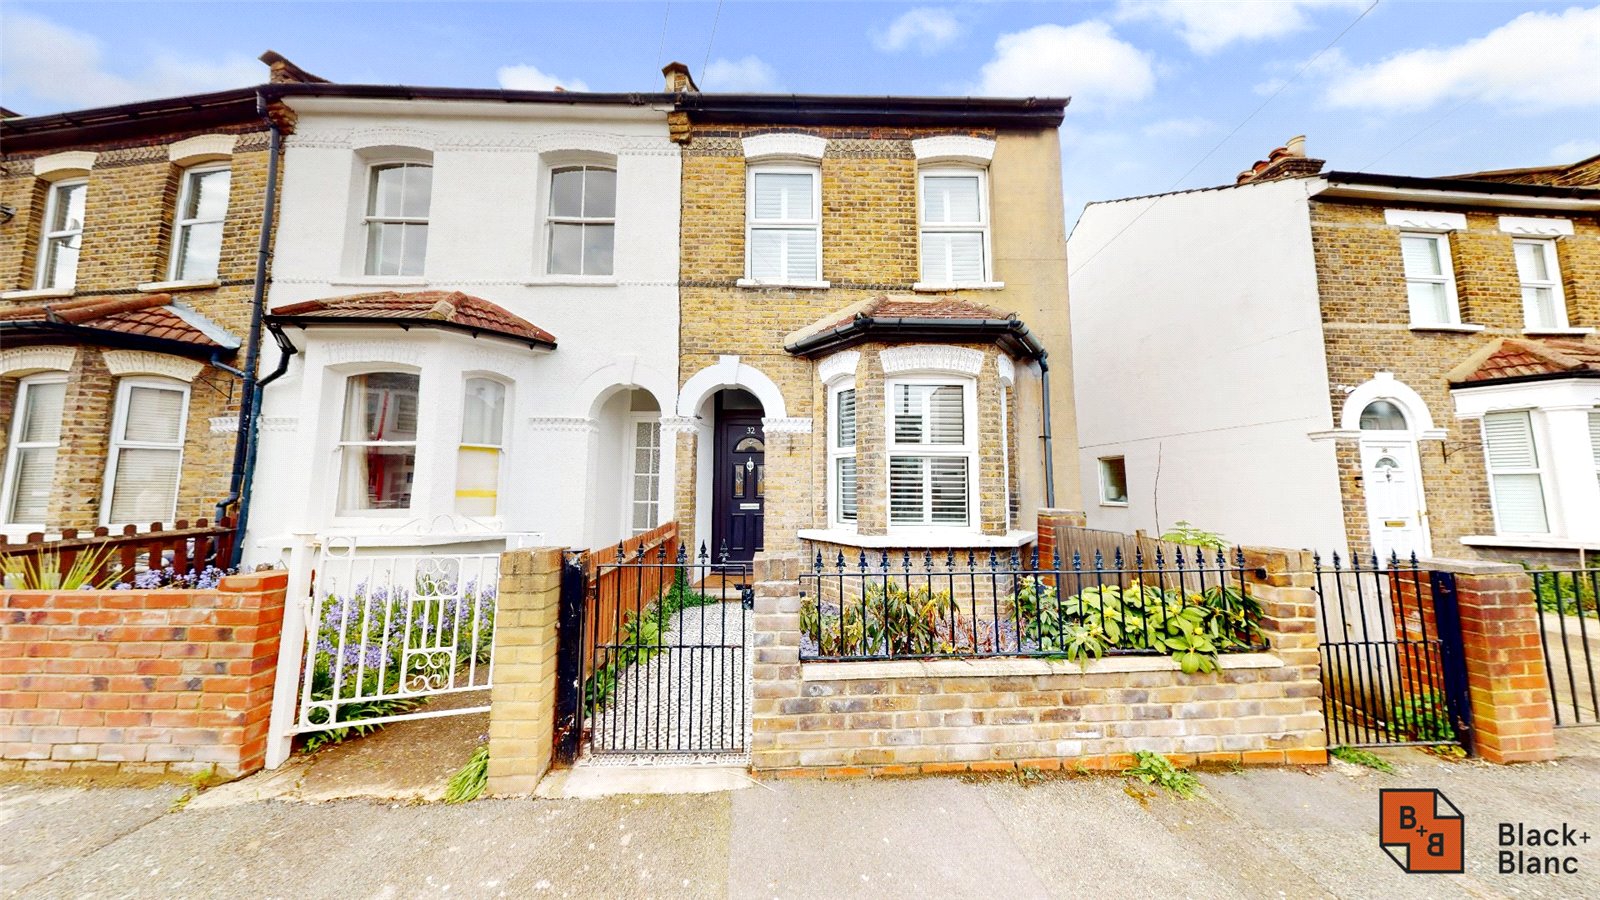 2 bed house for sale in Oval Road - Property Image 1